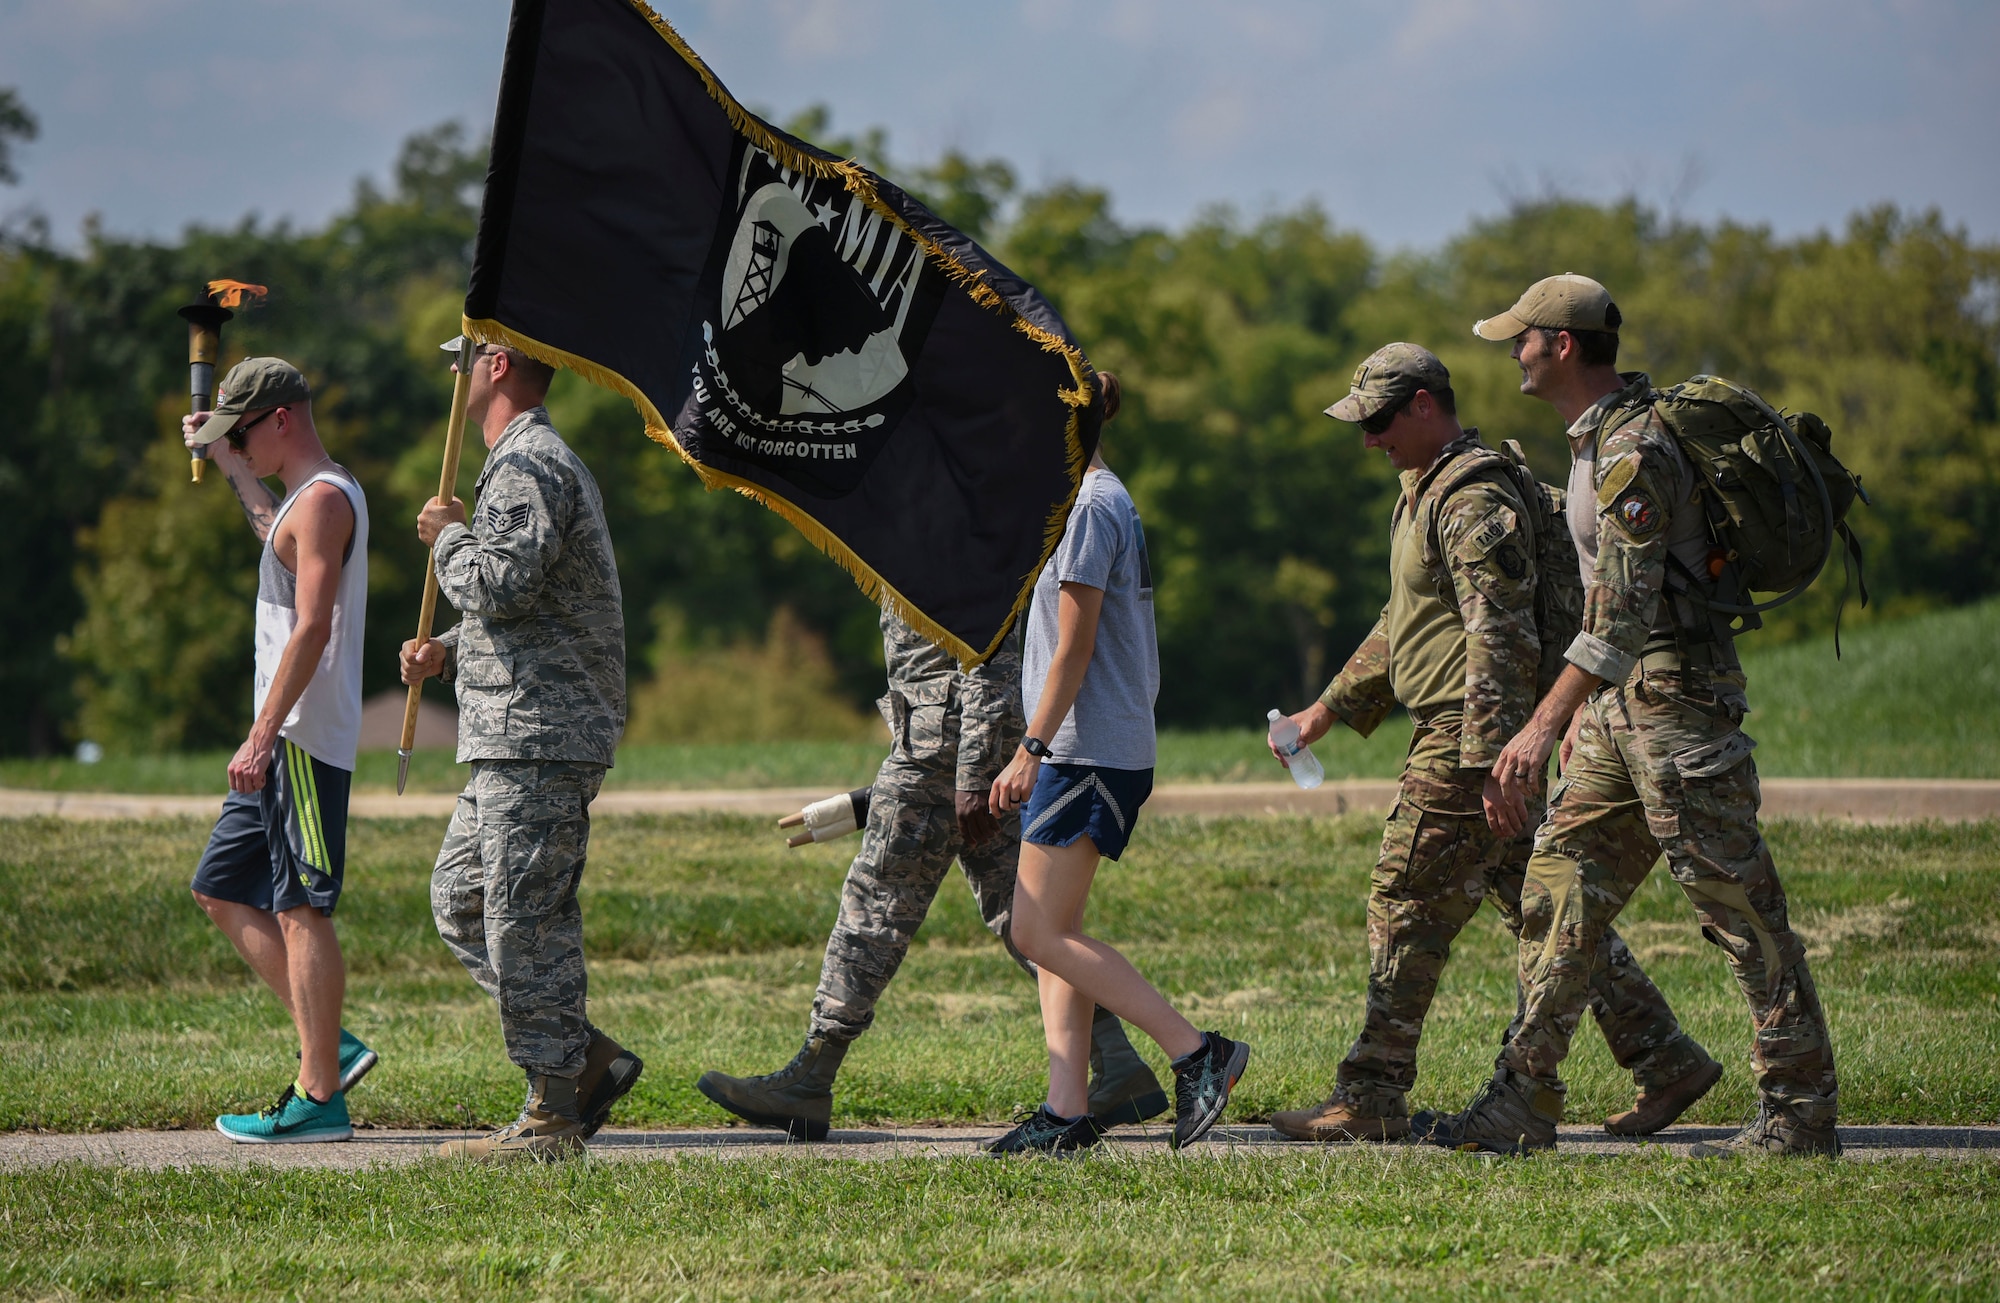 Volunteers from the National Air and Space Intelligence Center, carry the POW/MIA flag, scroll, and torch during the annual POW/MIA walk/run on Wright-Patterson Air Force Base, Ohio, Sept. 20, 2018. Runners/walkers carried the POW/MIA flag and torch continuously for 24 hours to honor all past and present POW/MIA. (U.S. Air Force photo by Senior Airman Holly Ardern)